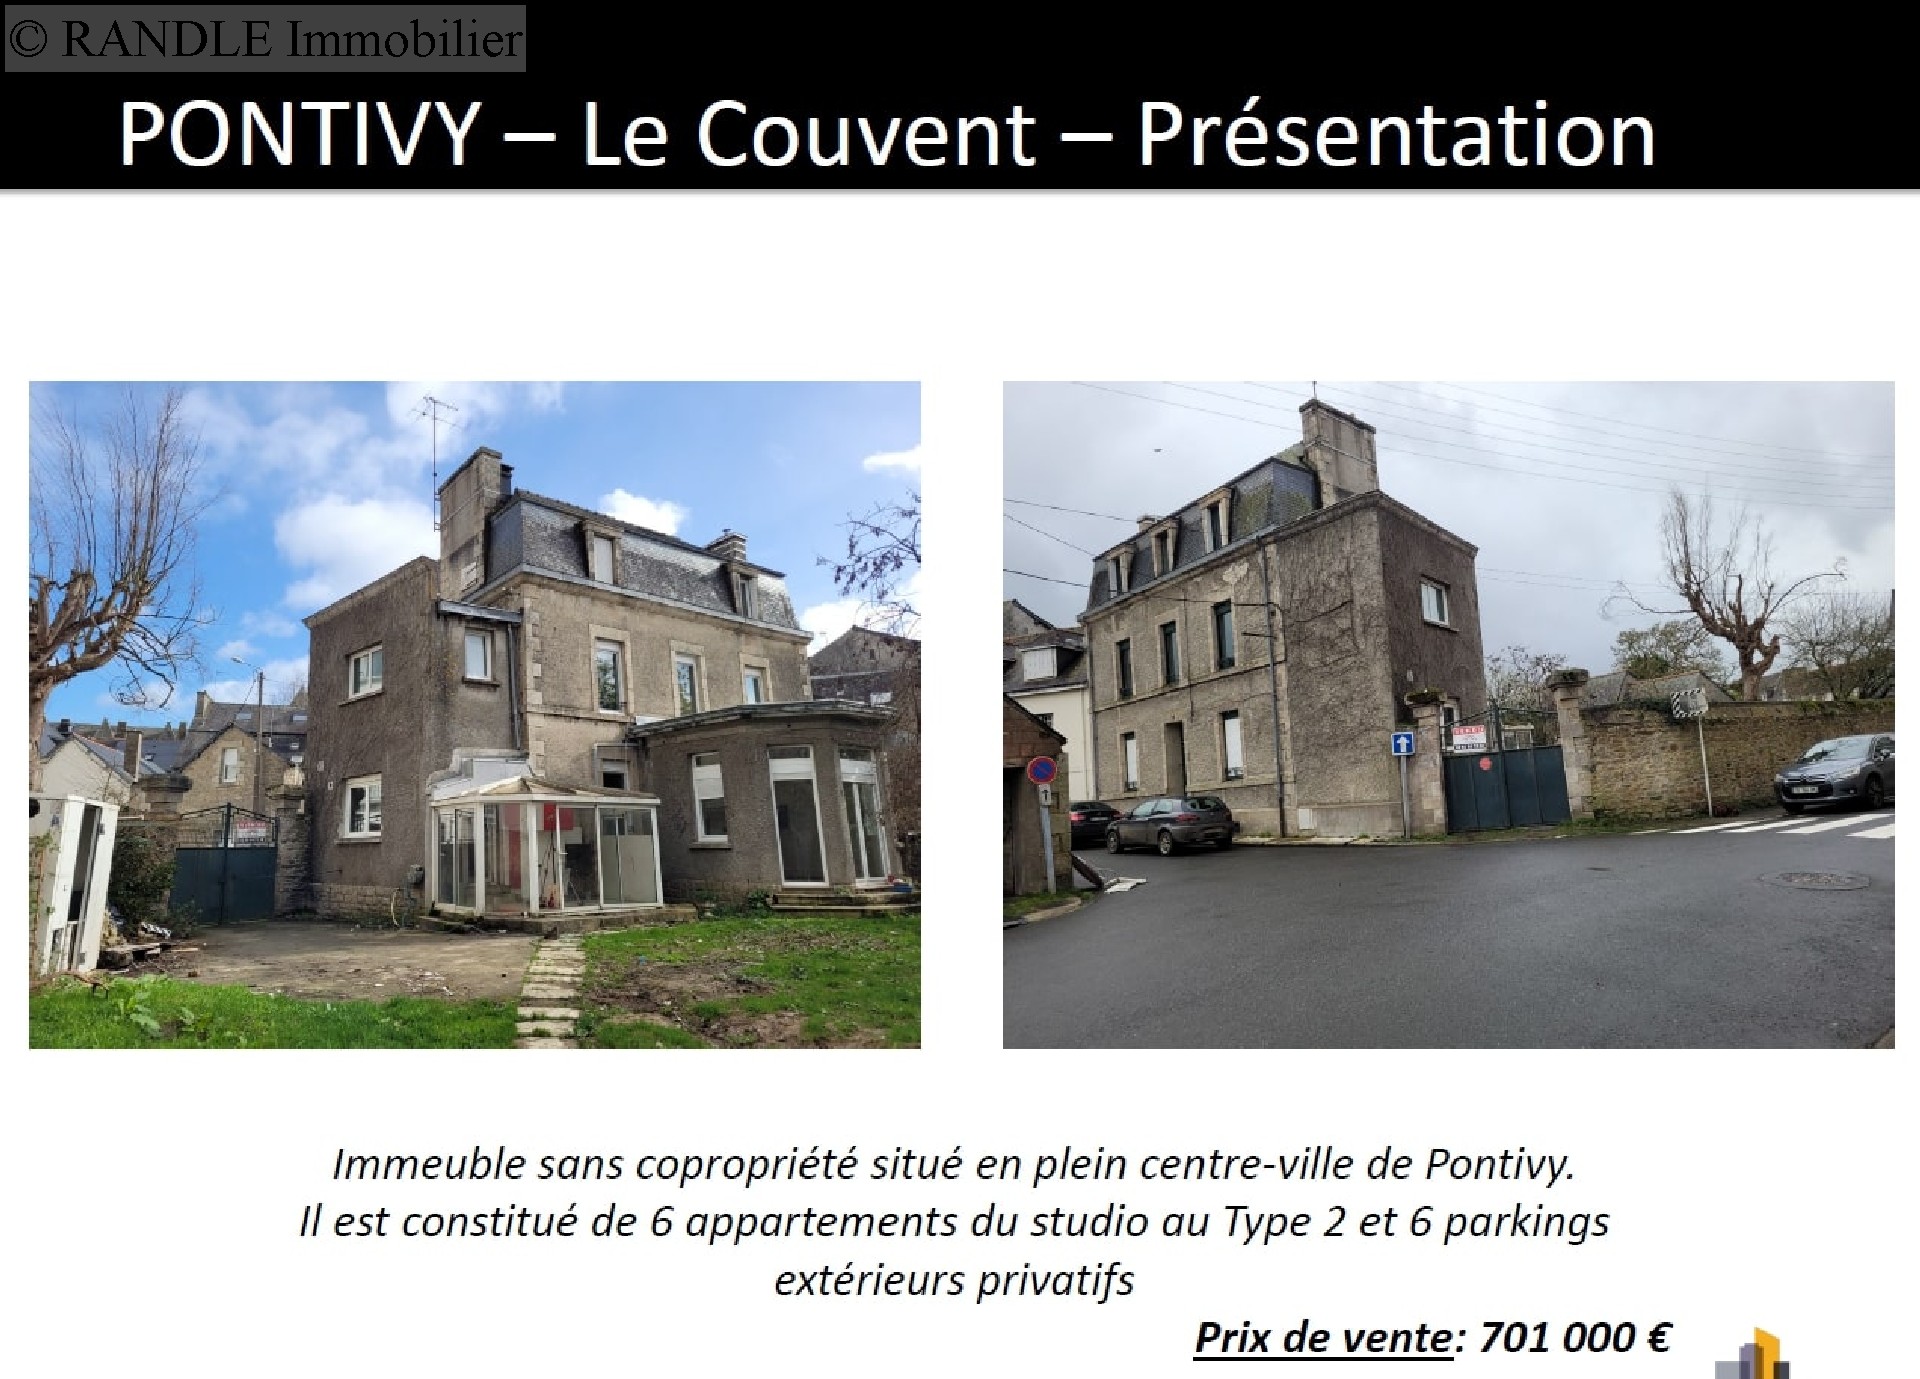 Sell building - PONTIVY 201 m², 12 rooms